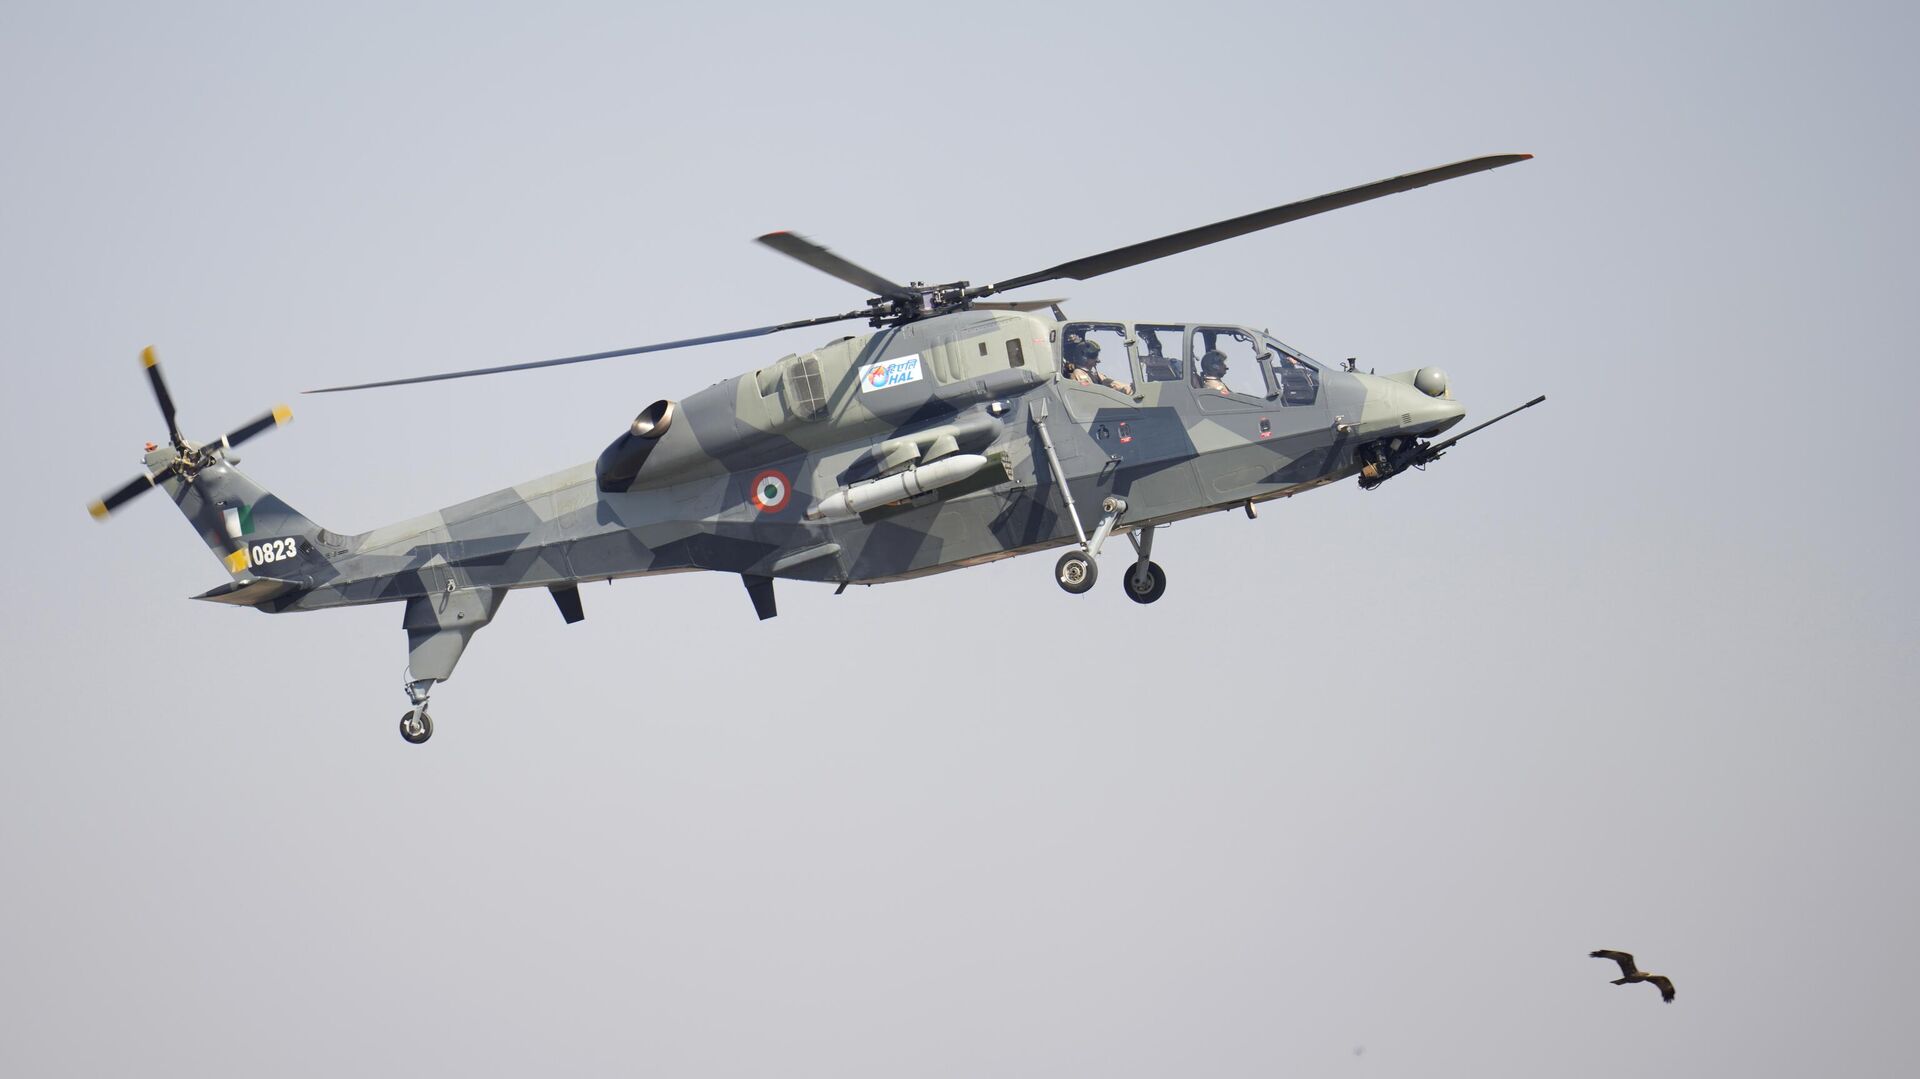 India's indigenous light combat helicopter Prachand flies over a bird during the inauguration of the Aero India 2023 at Yelahanka air base in Bengaluru, India, Monday, Feb. 13, 2023. - Sputnik India, 1920, 16.02.2023